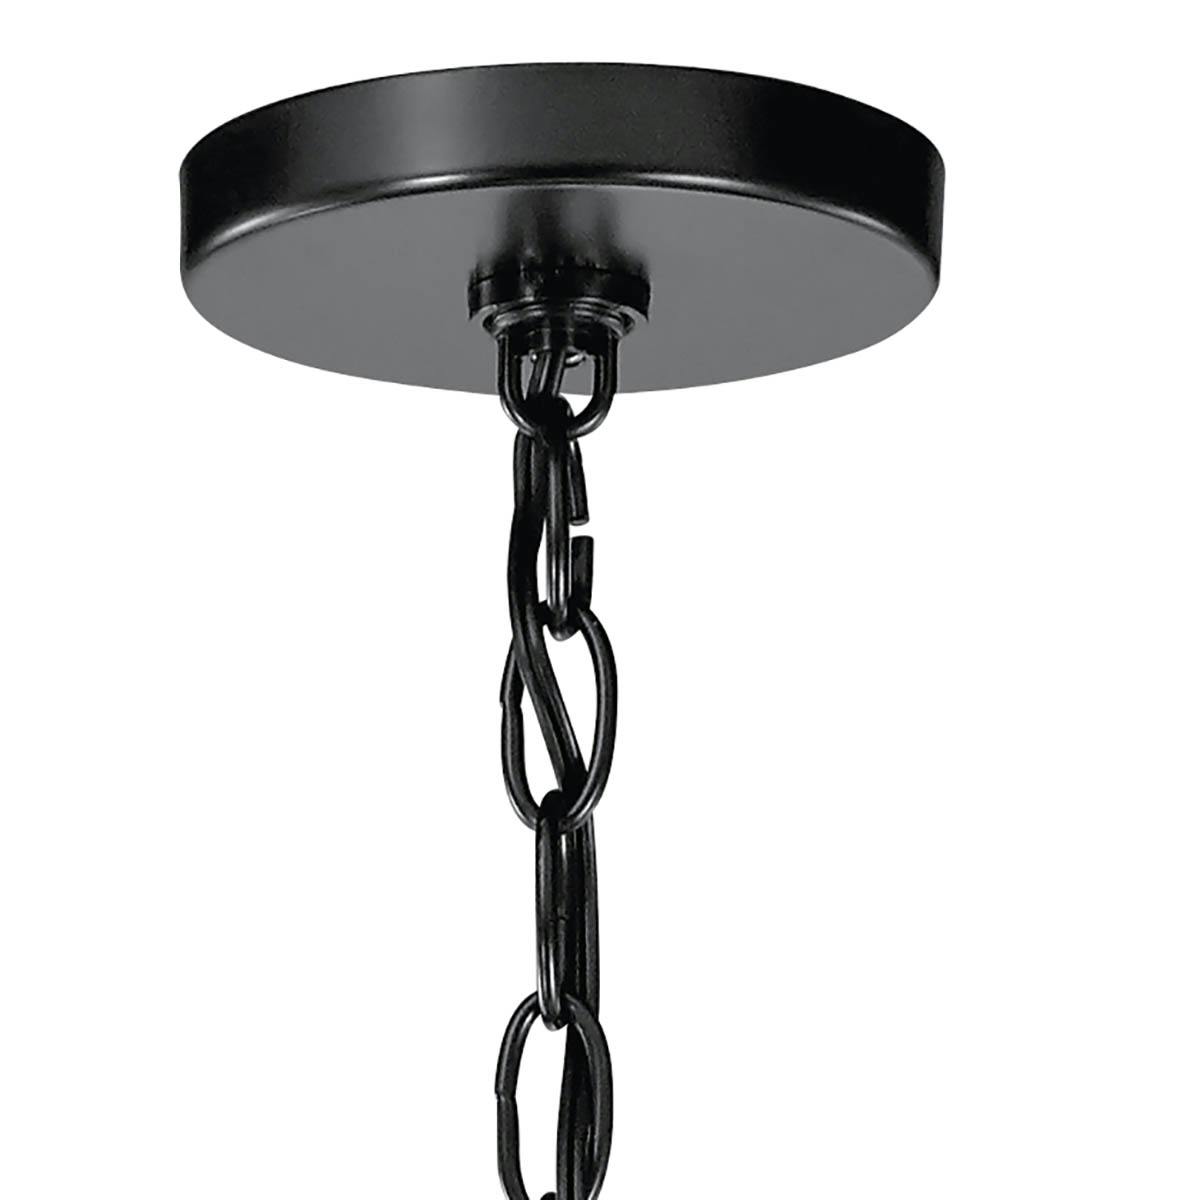 Canopy for the Valserrano 24.25" Chandelier Black on a white background